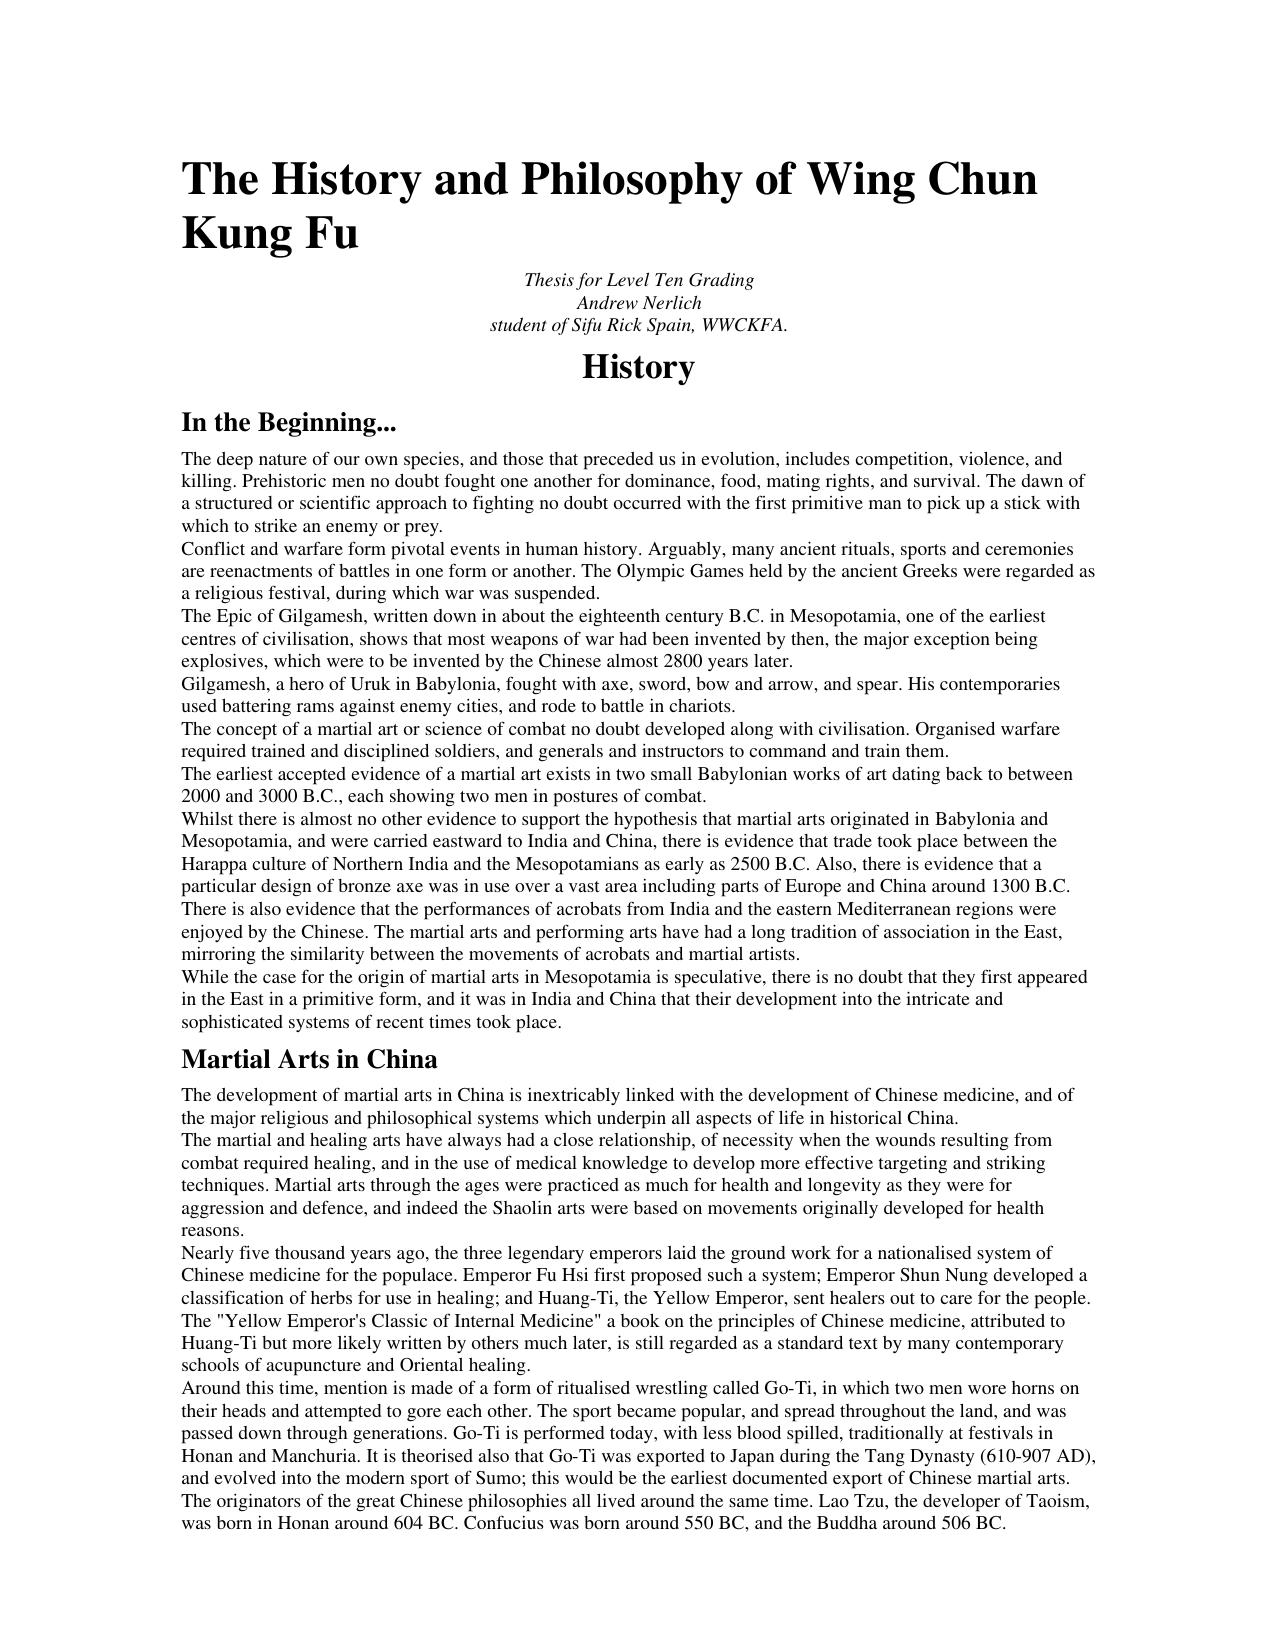 The History and Philosophy of Wing Chun Kung Fu